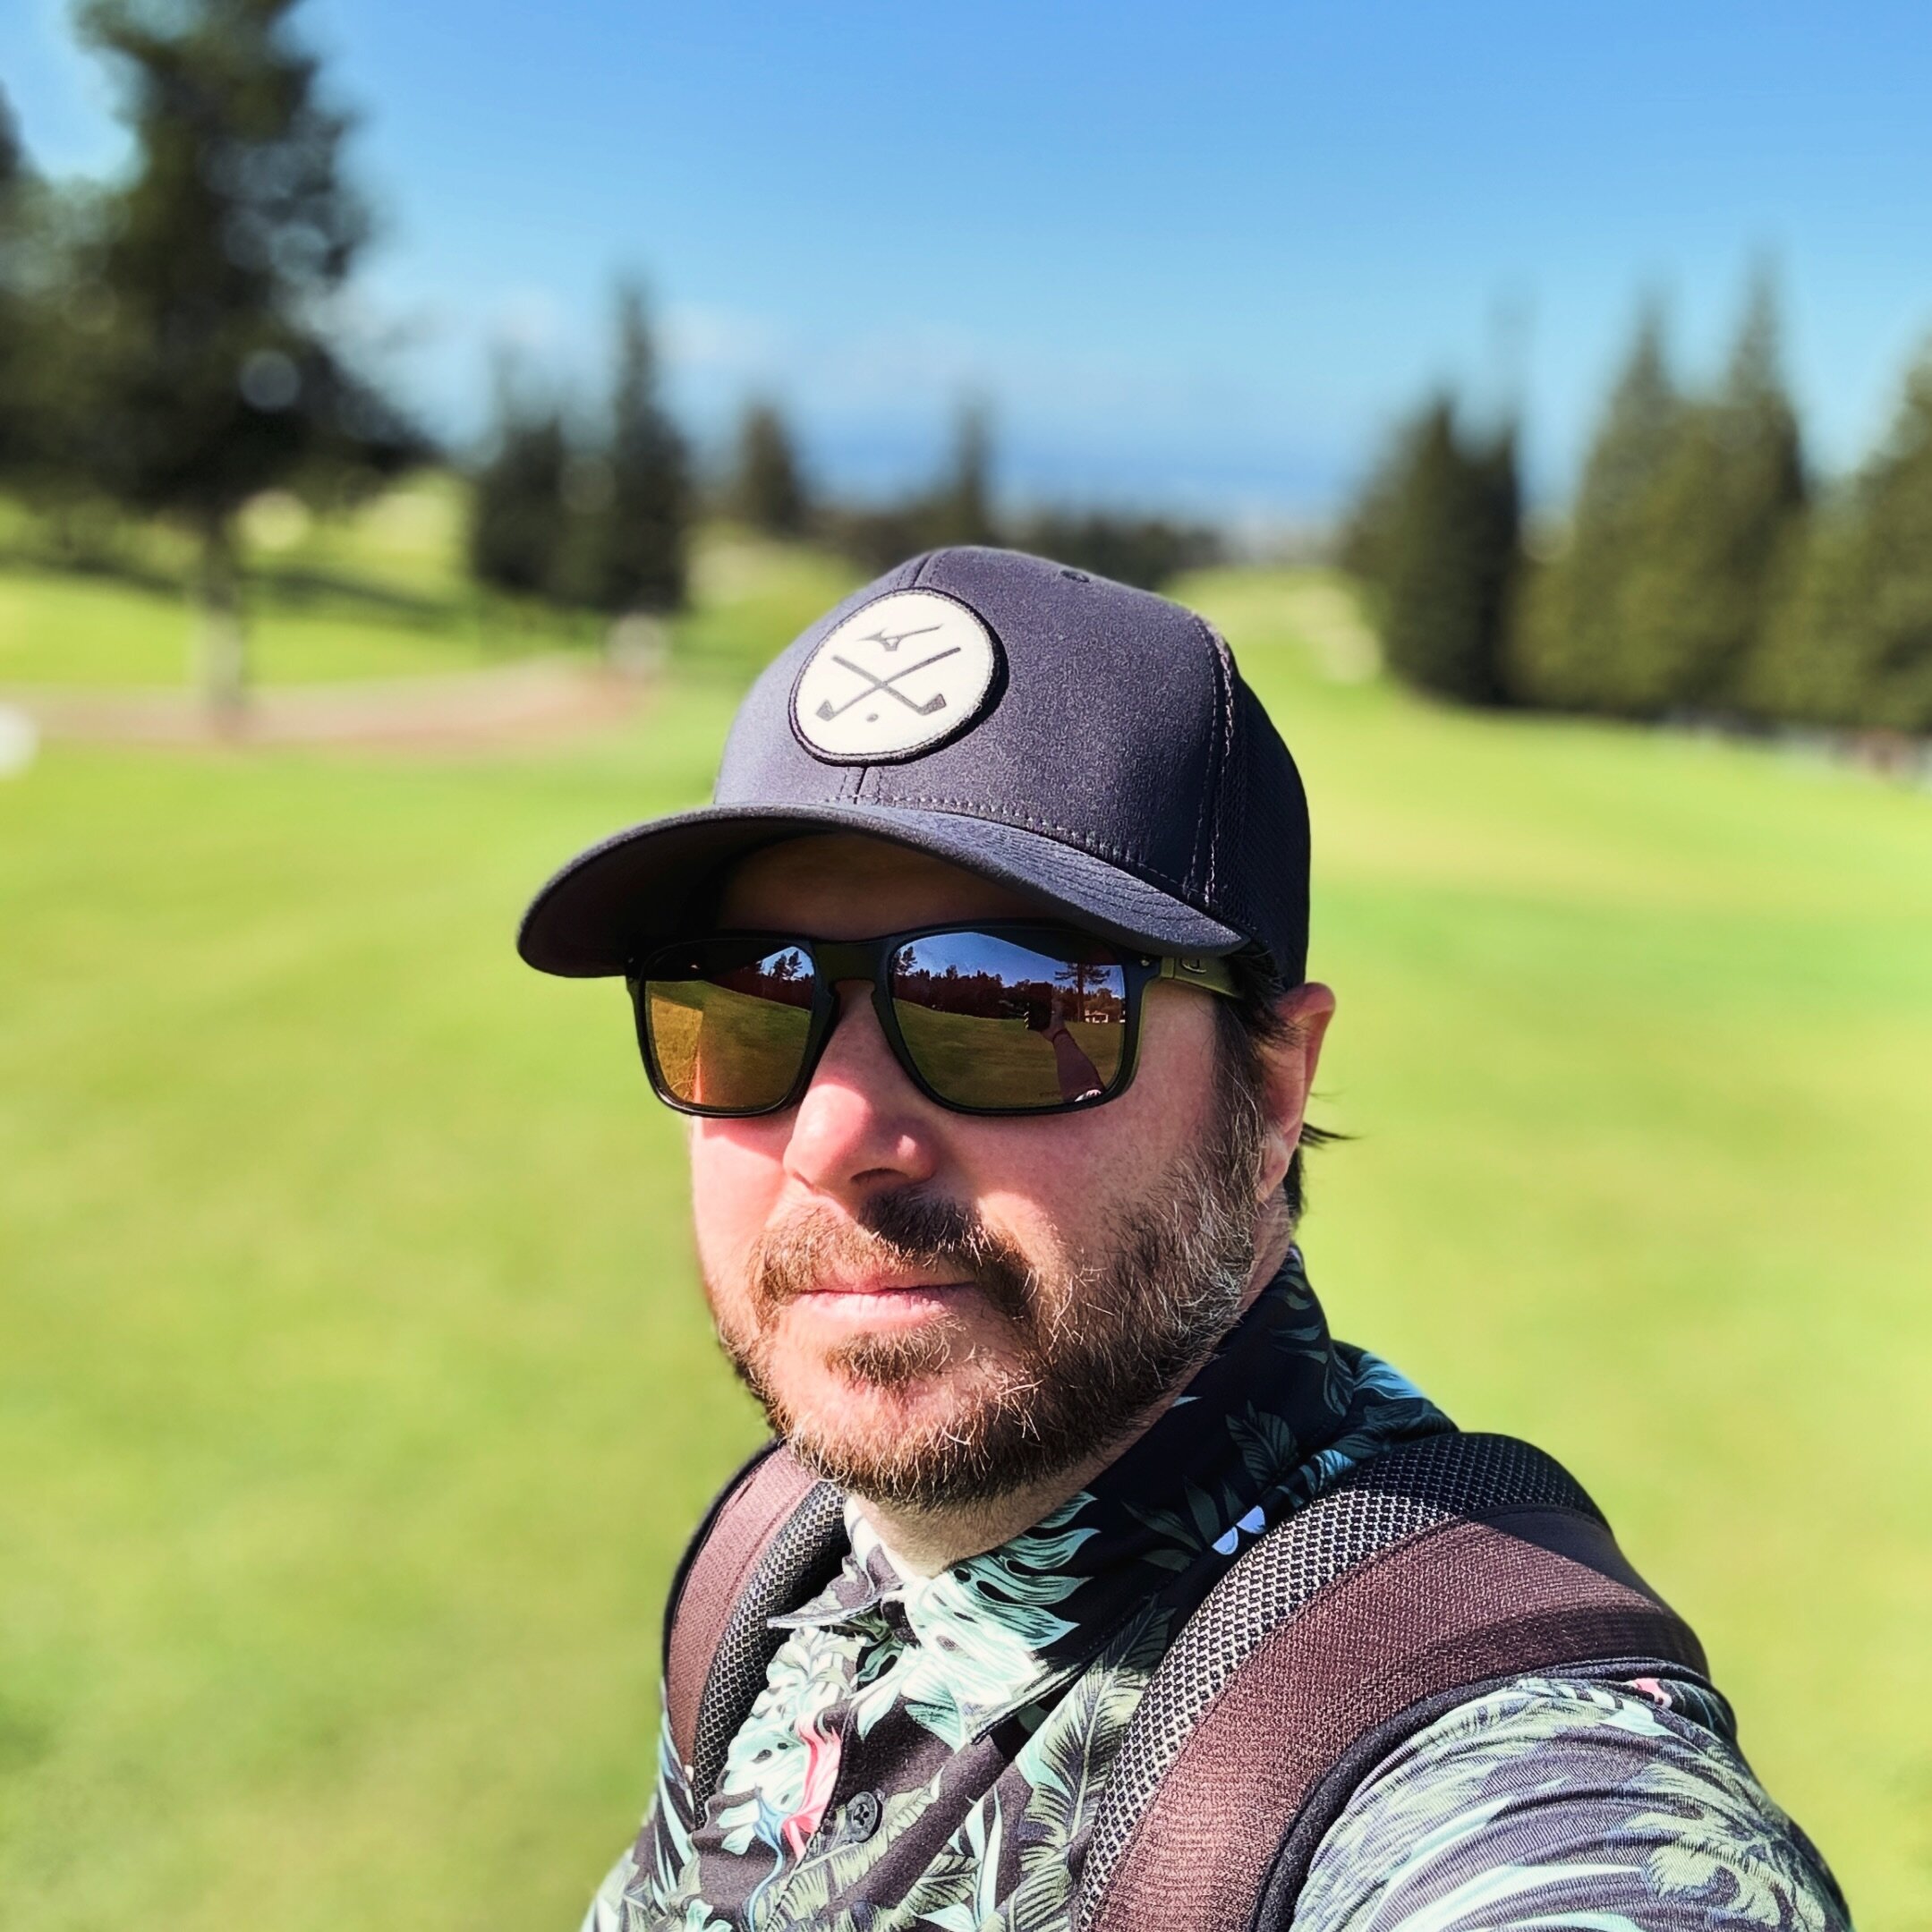 Apparently I still play golf&hellip; I know I post a lot of guitar shit.  Just a reminder I am way better at golf!!!